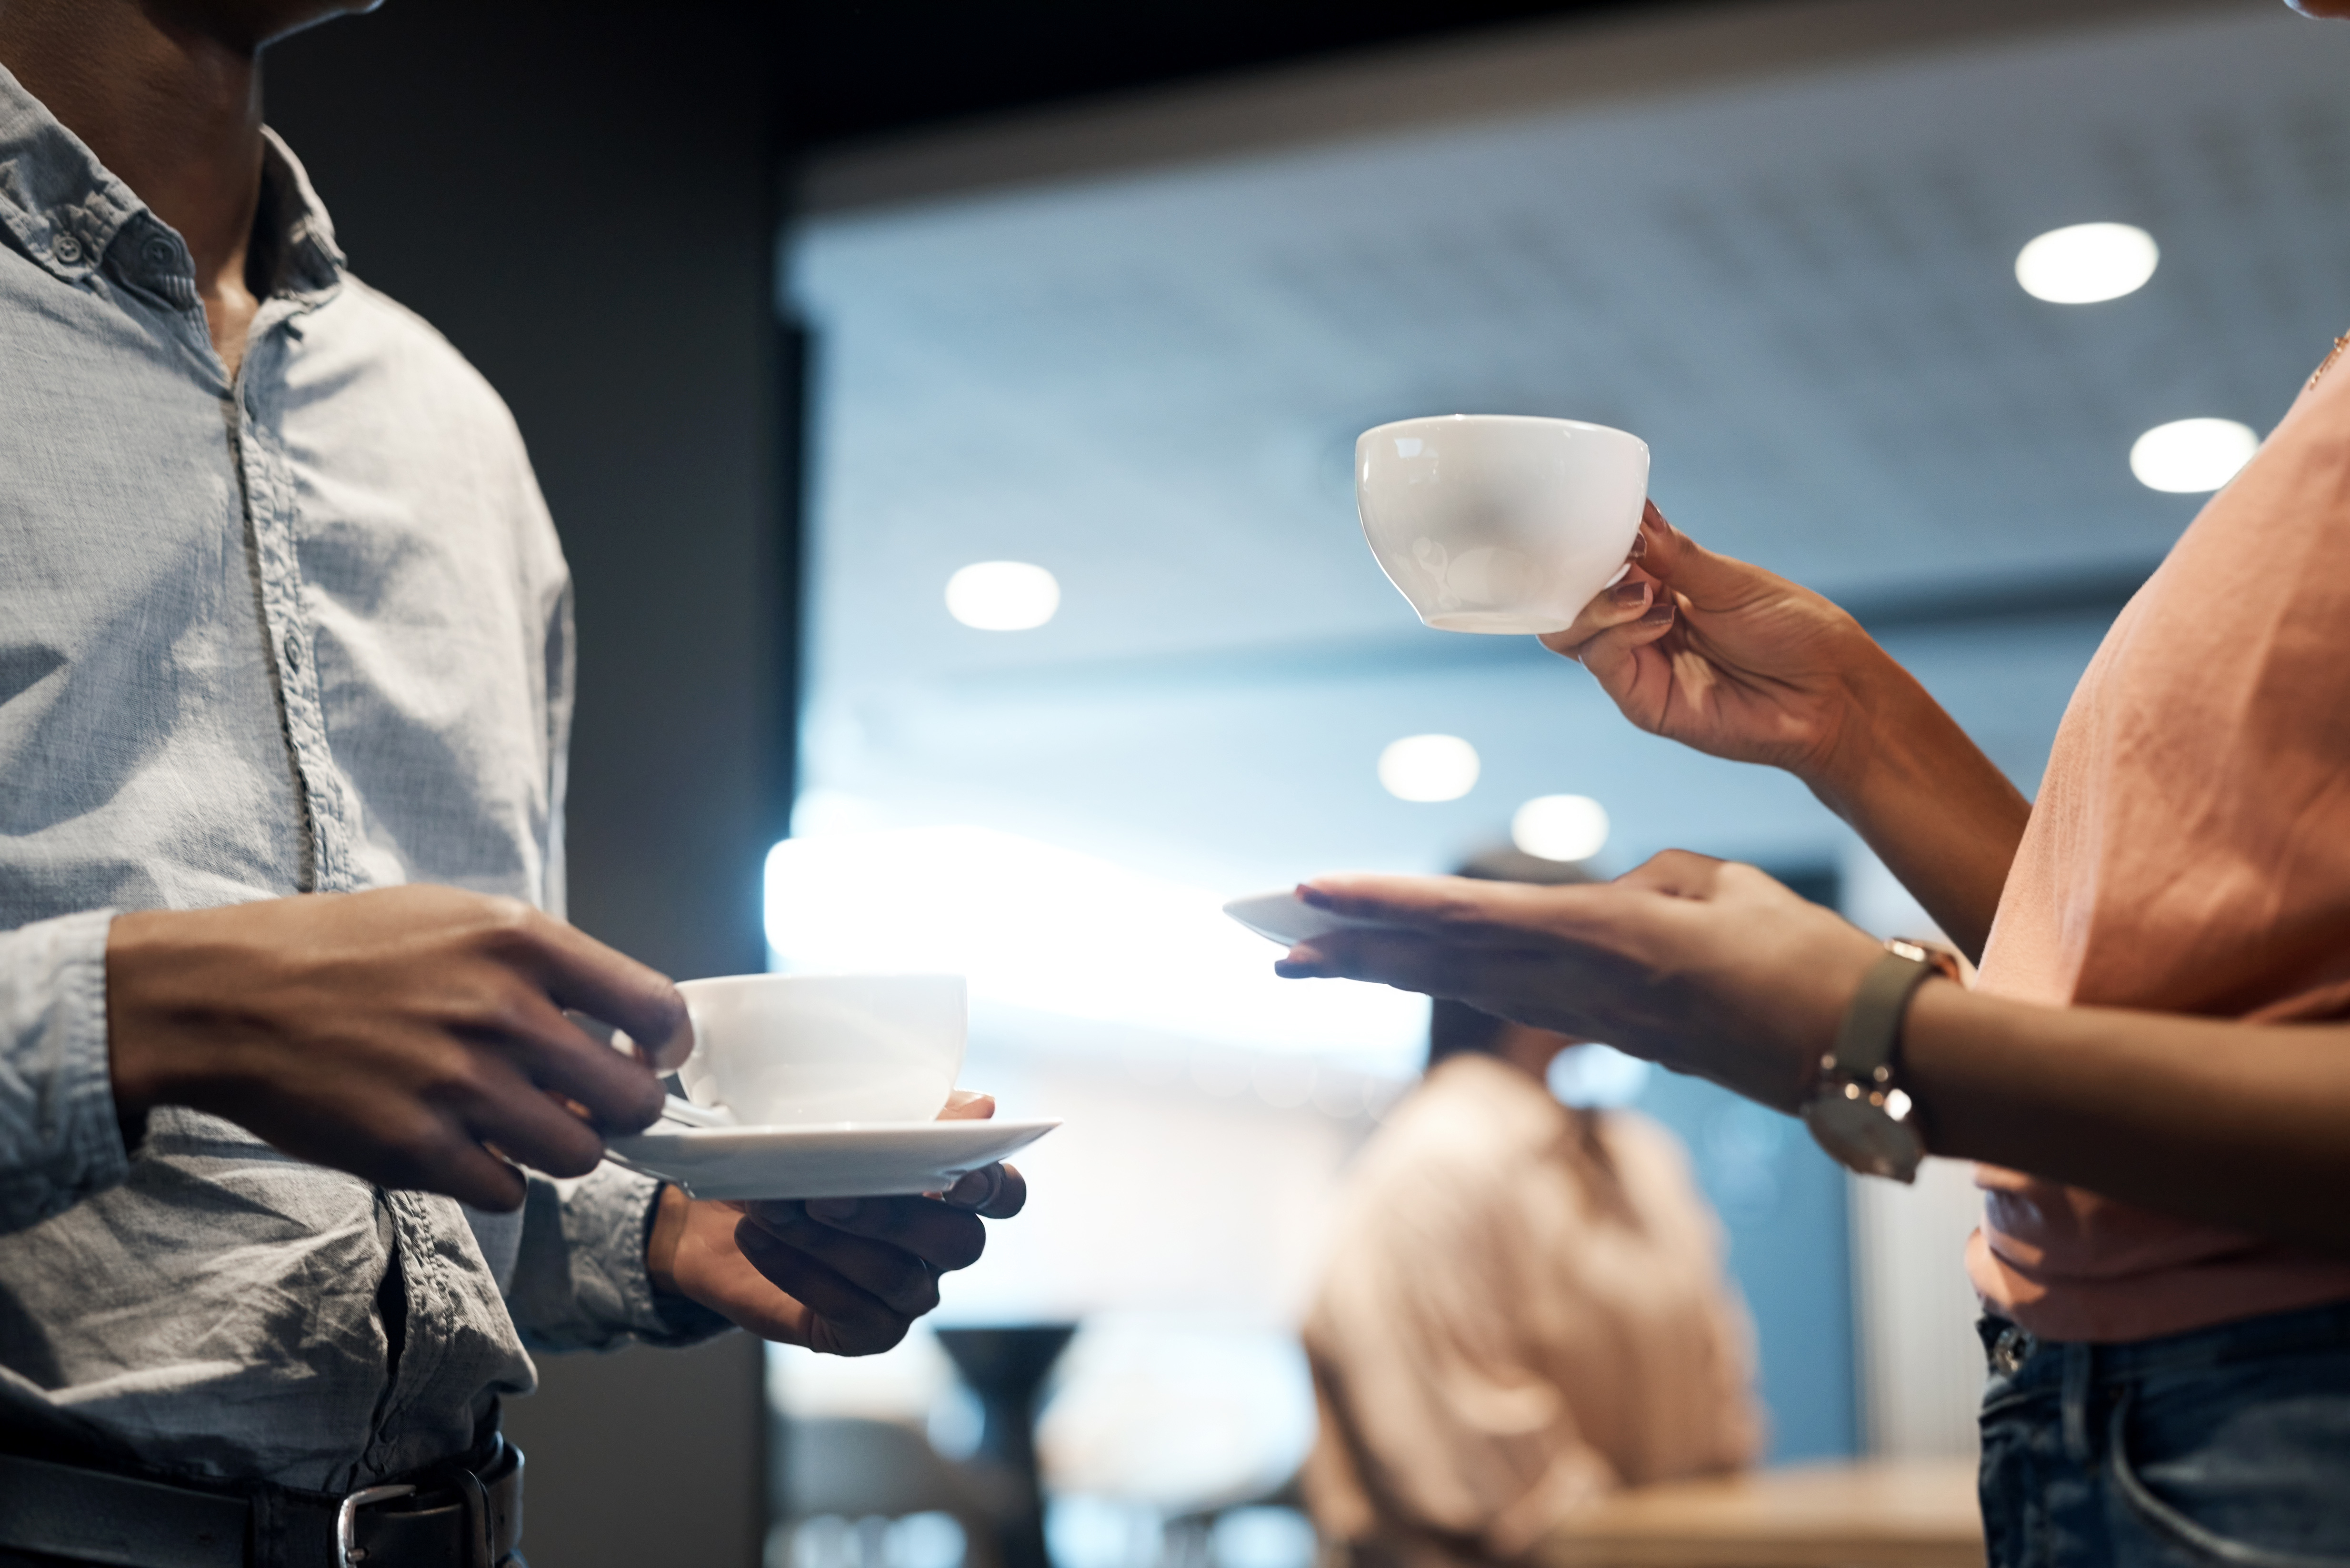 Two people having a conversation, holding cups of coffee